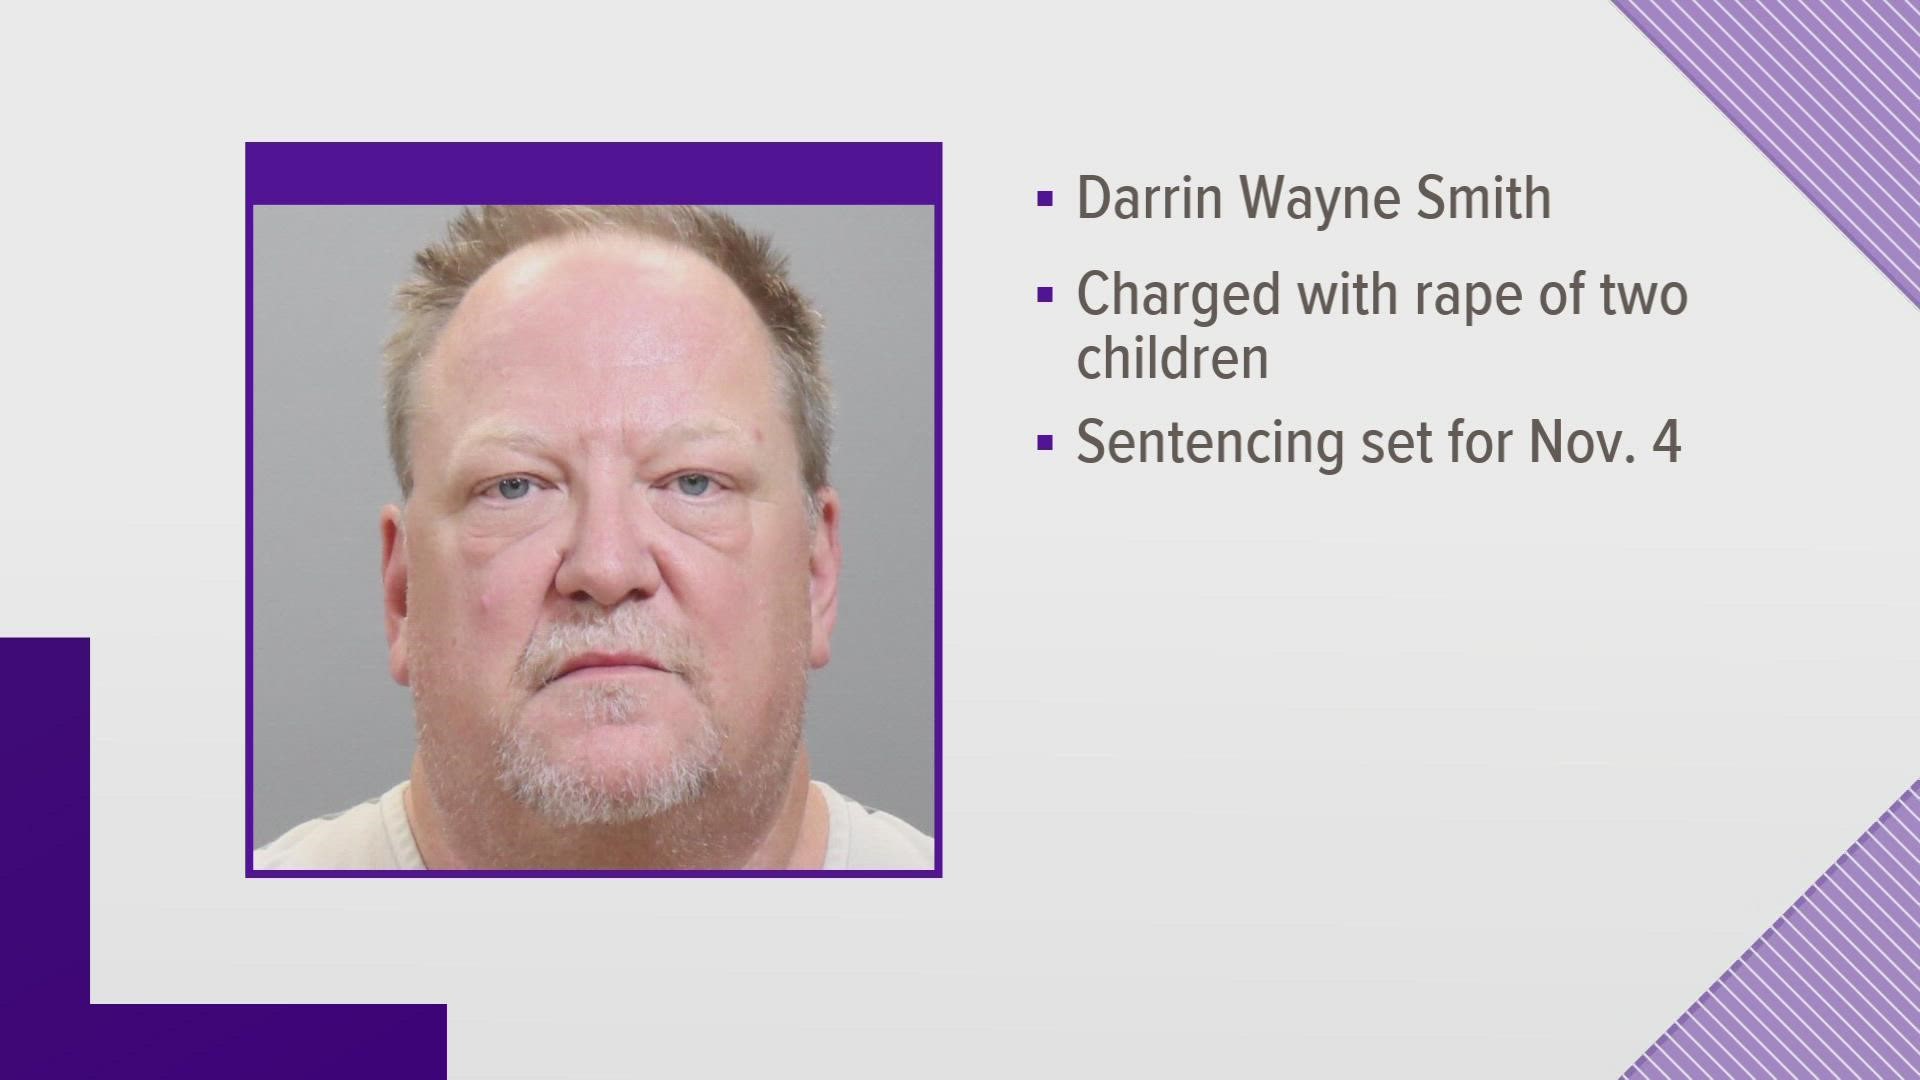 Darrin Wayne Smith has been convicted of more than 30 counts of child abuse, including rape of a child and sexual battery.